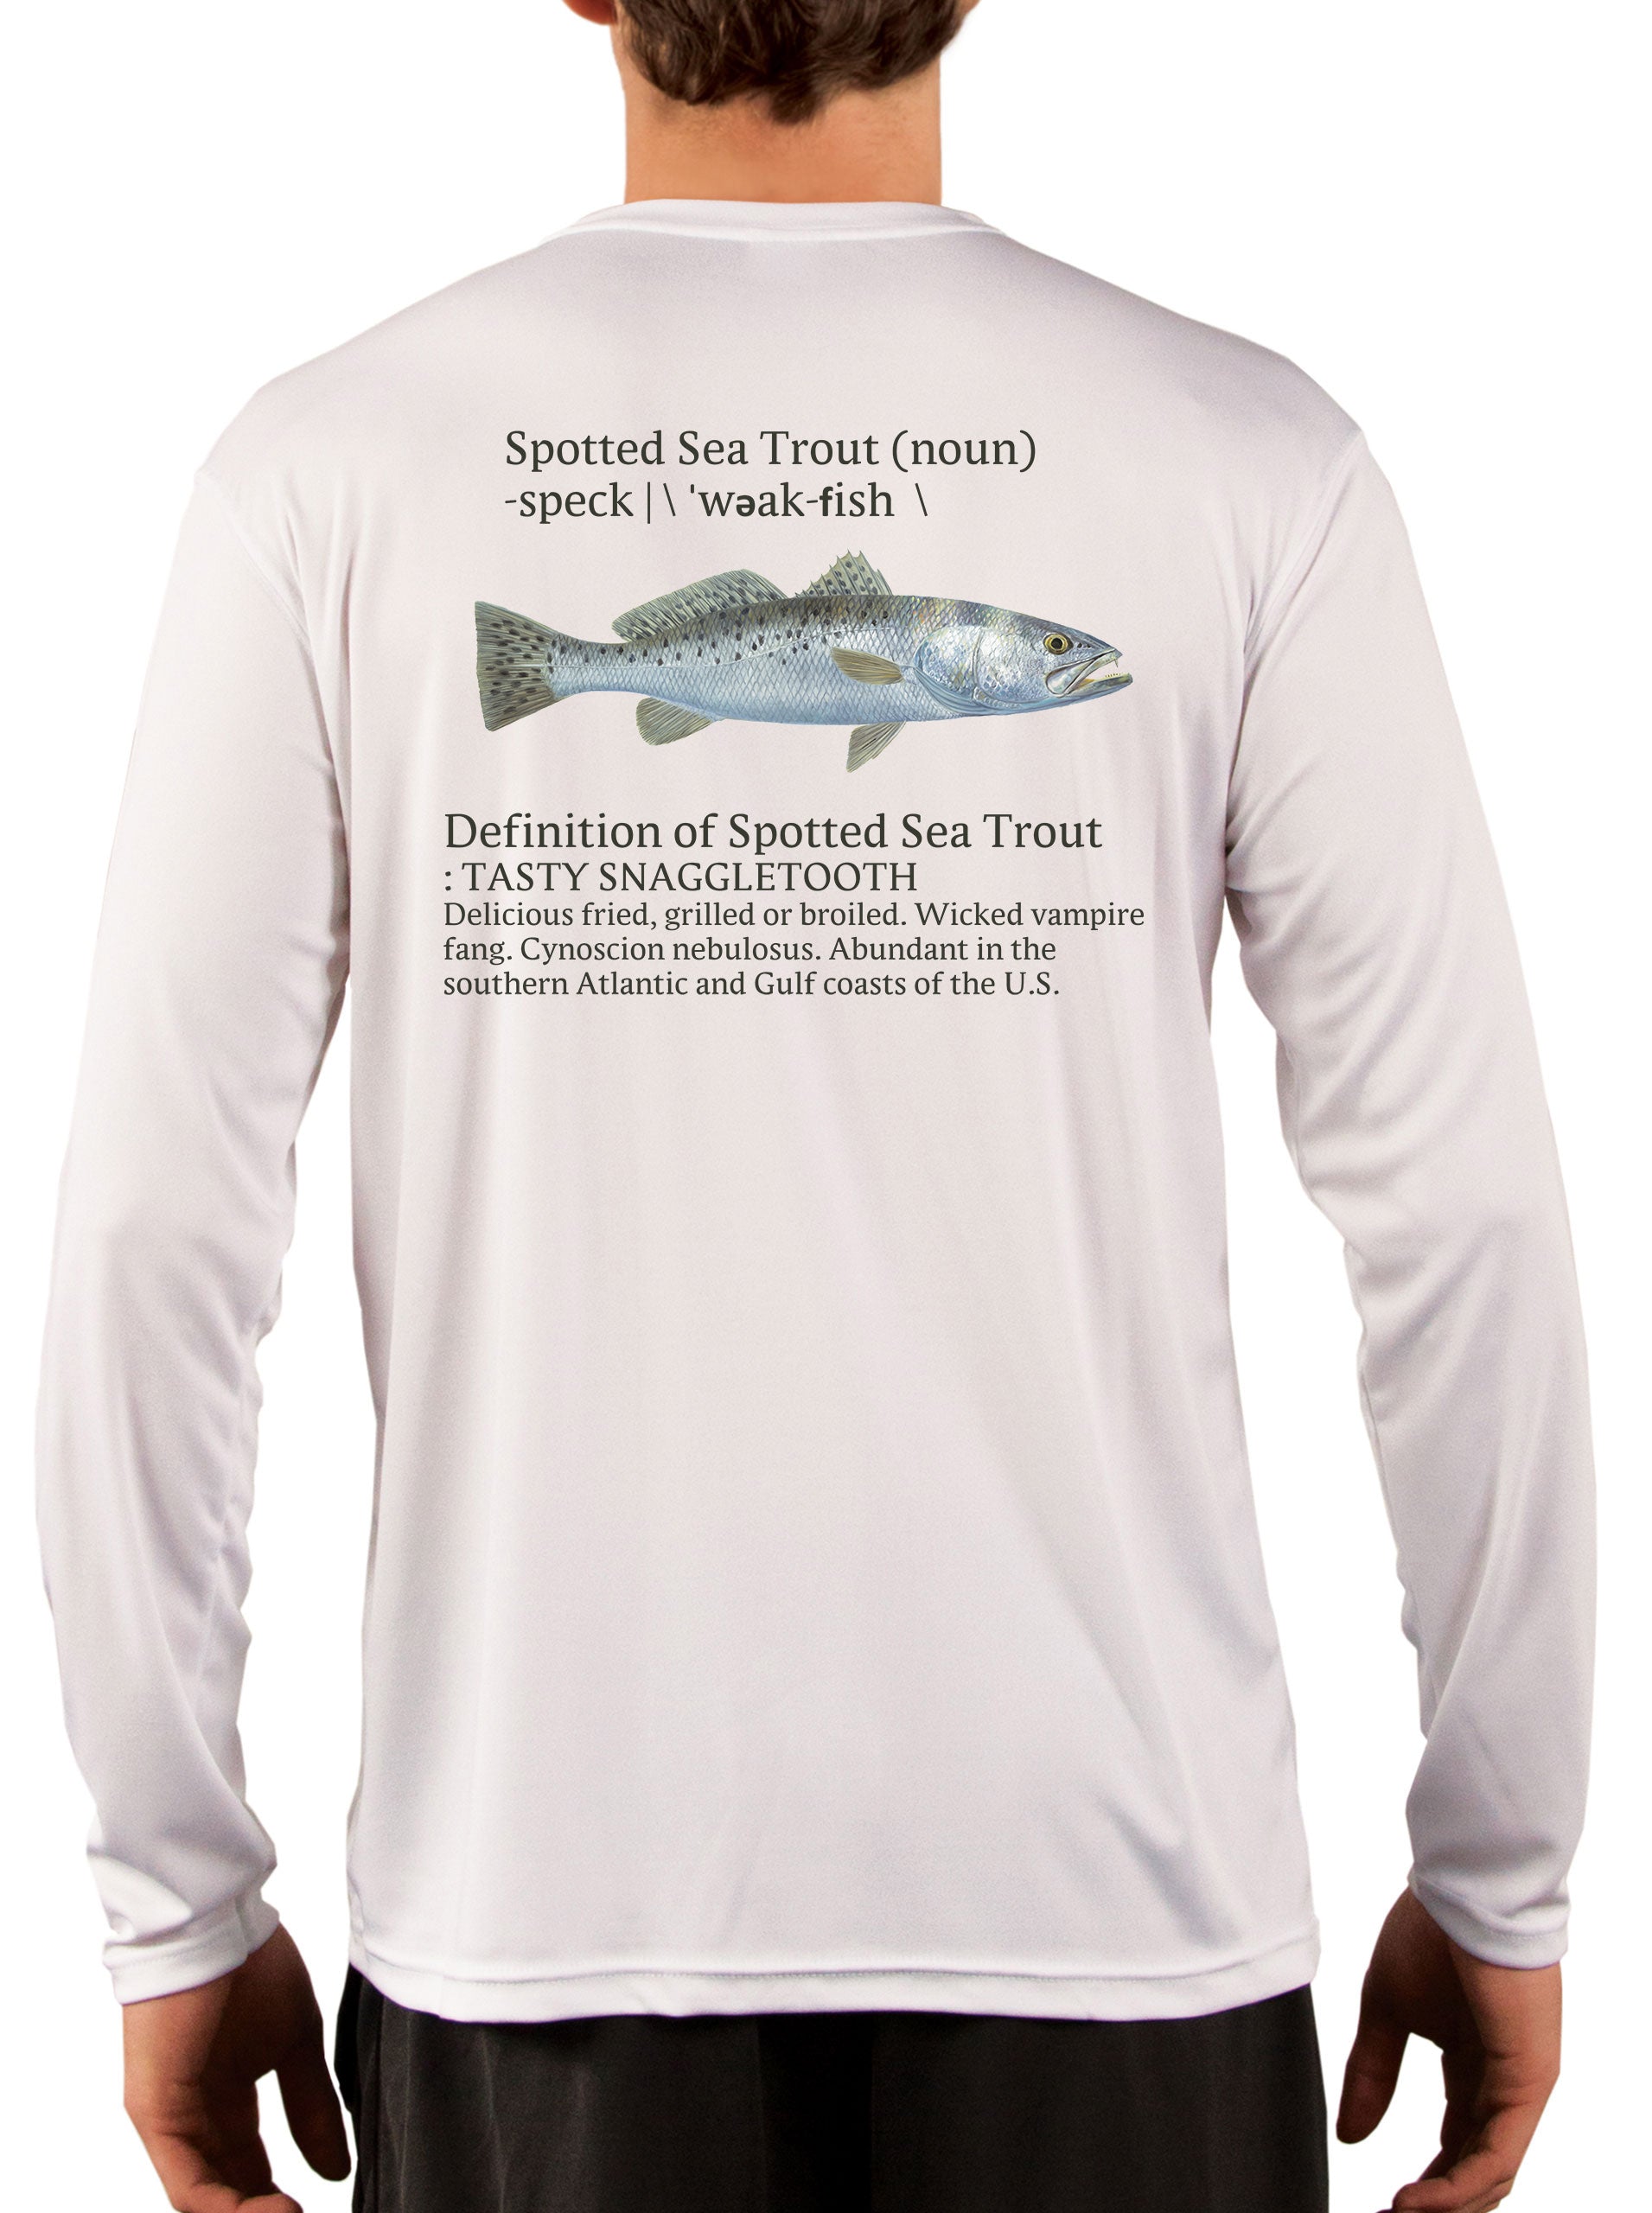 Speckled Trout Fishing Shirts for Men Skiff Inshore - UV Protected +50 Sun  Protection with Moisture Wicking Technology